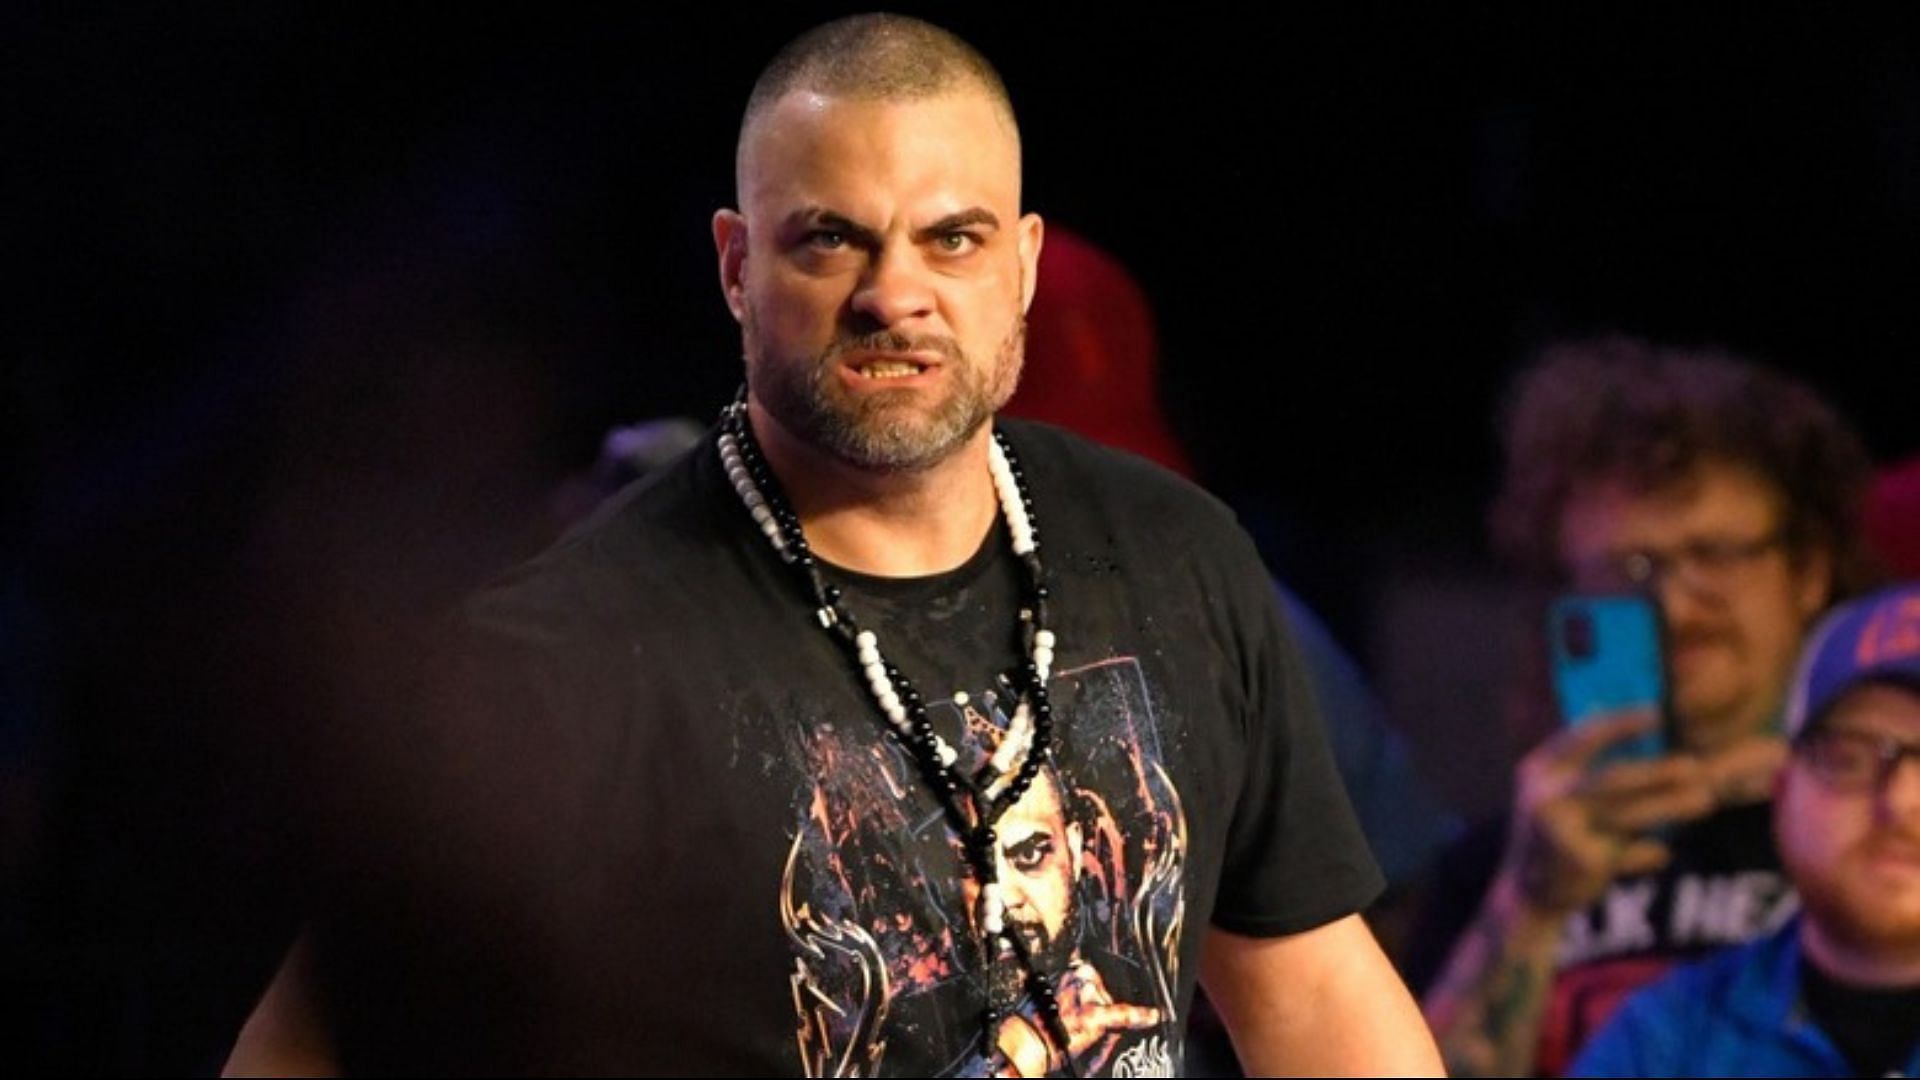 Eddie Kingston is the ROH World Champion and the NJPW STRONG Openweight Champion